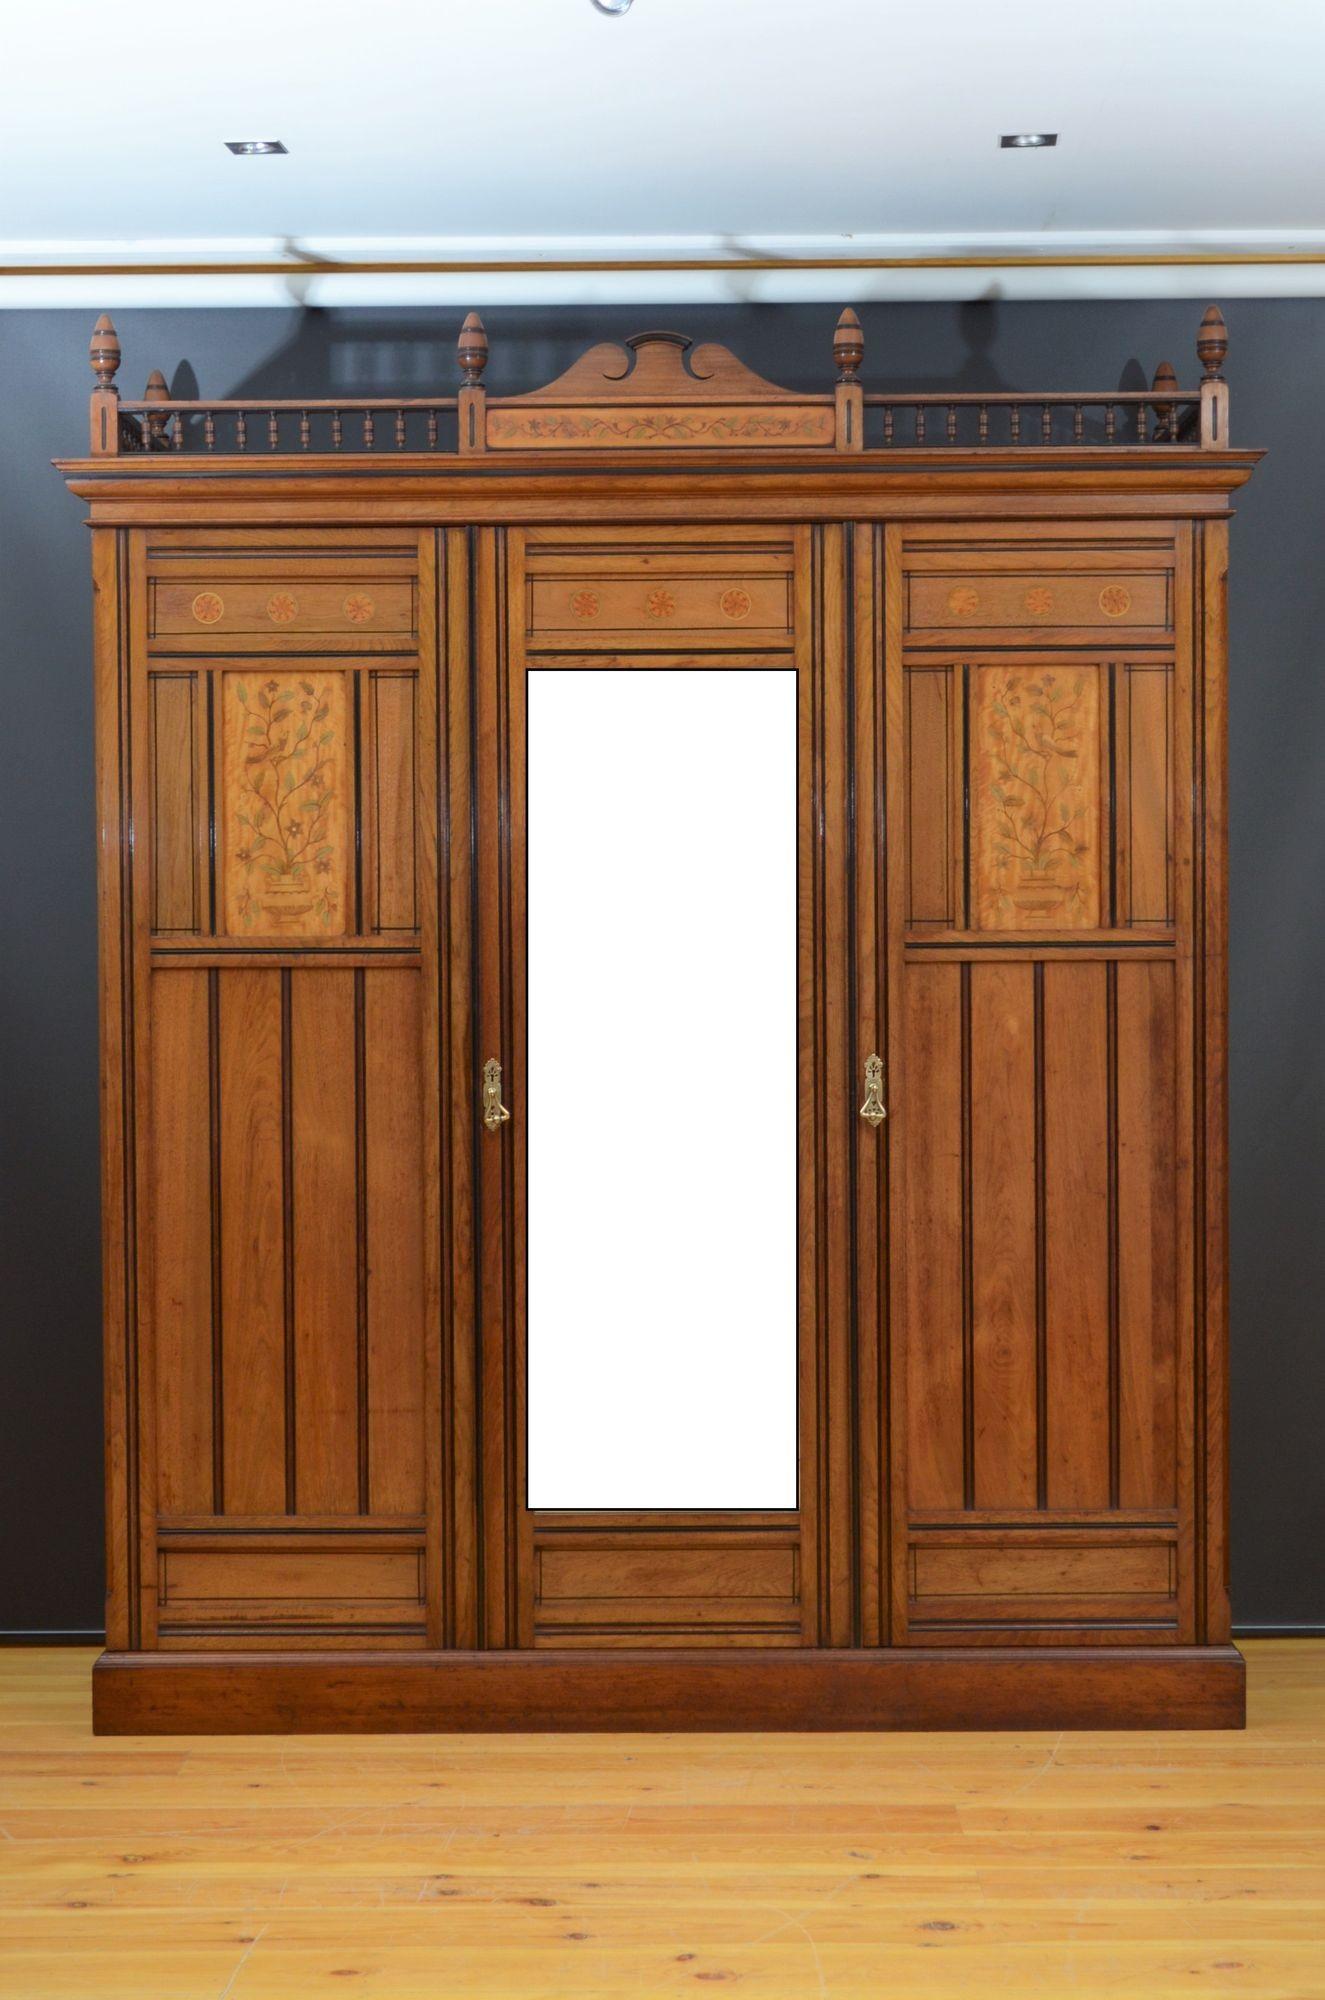 Sn5441 Superb Victorian three door wardrobe, having swan neck pediment with inlaid panel flanked by reeded spindles to the top ( the top gallery is optional and can be unscrewed) above mirrored centre door with satinwood inlaid panel flanked by